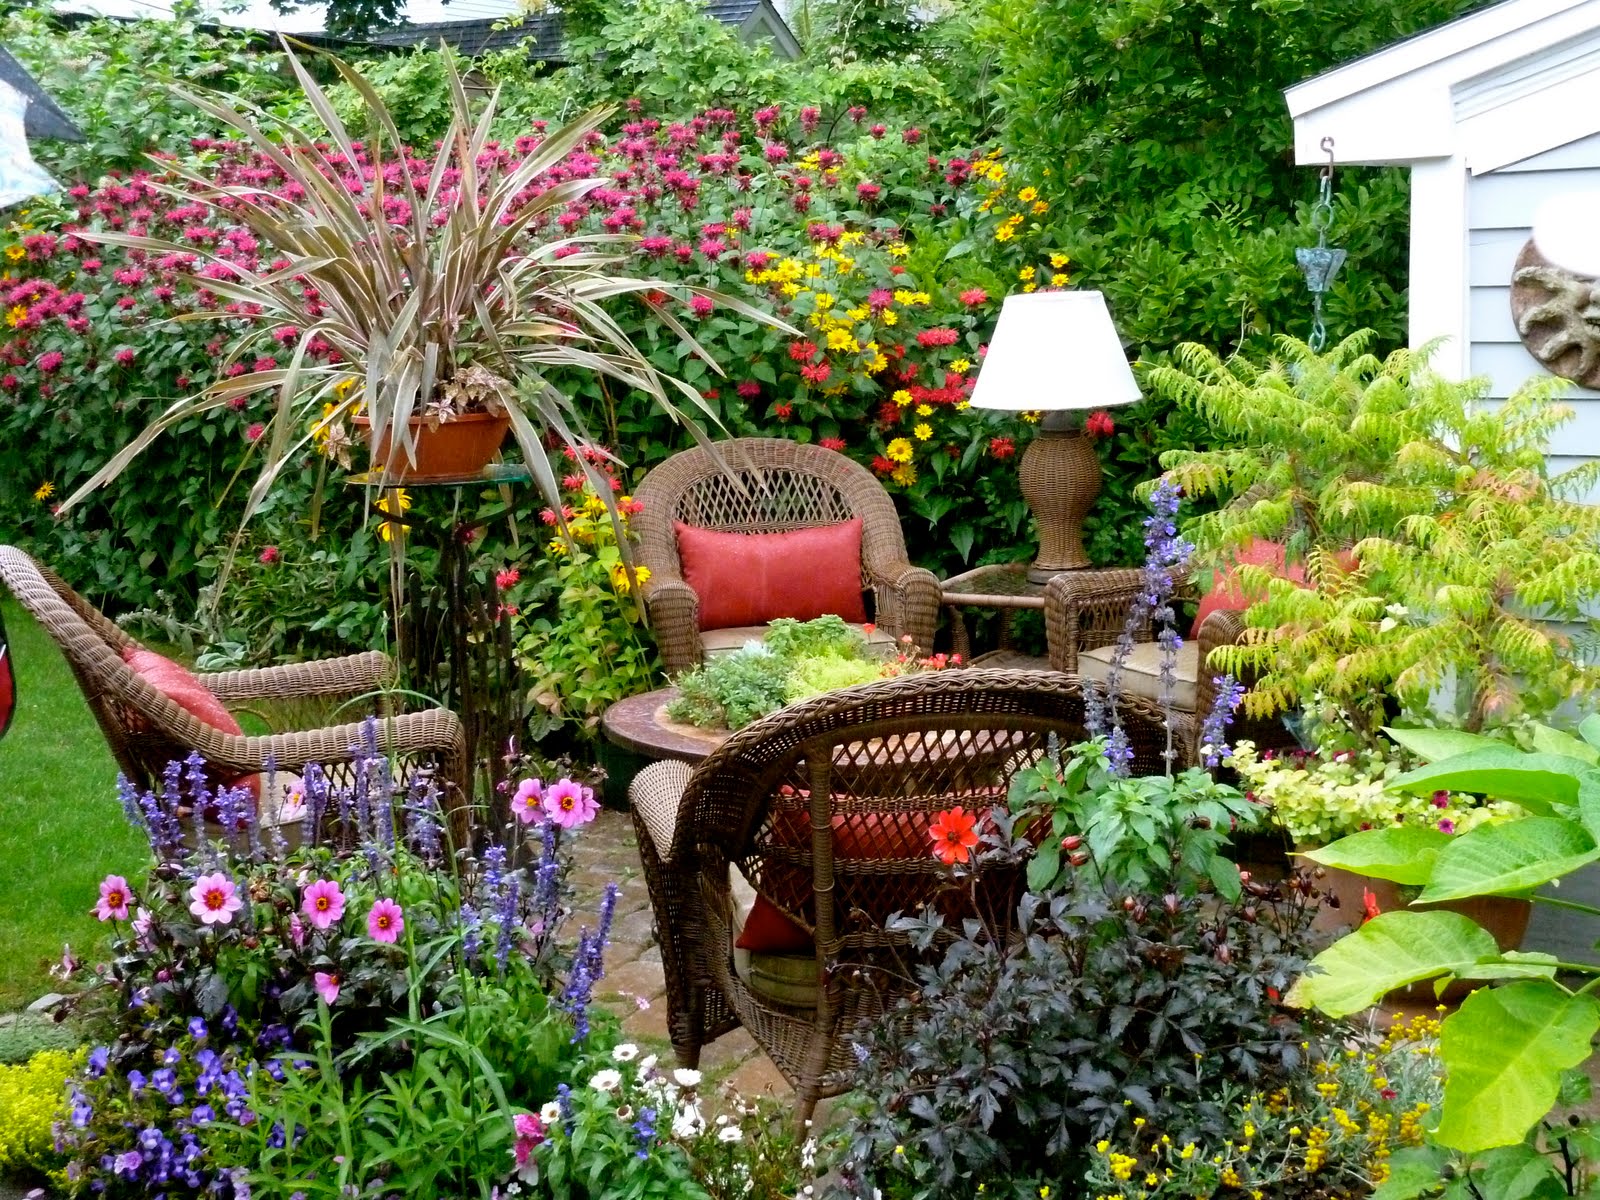 Awesome Garden For Small House With Various Flower Growth With Pink Red Yellow Purple And Many Beauty Color Lamp Sitting Area With Rattan Chair And Wooden Table Garden